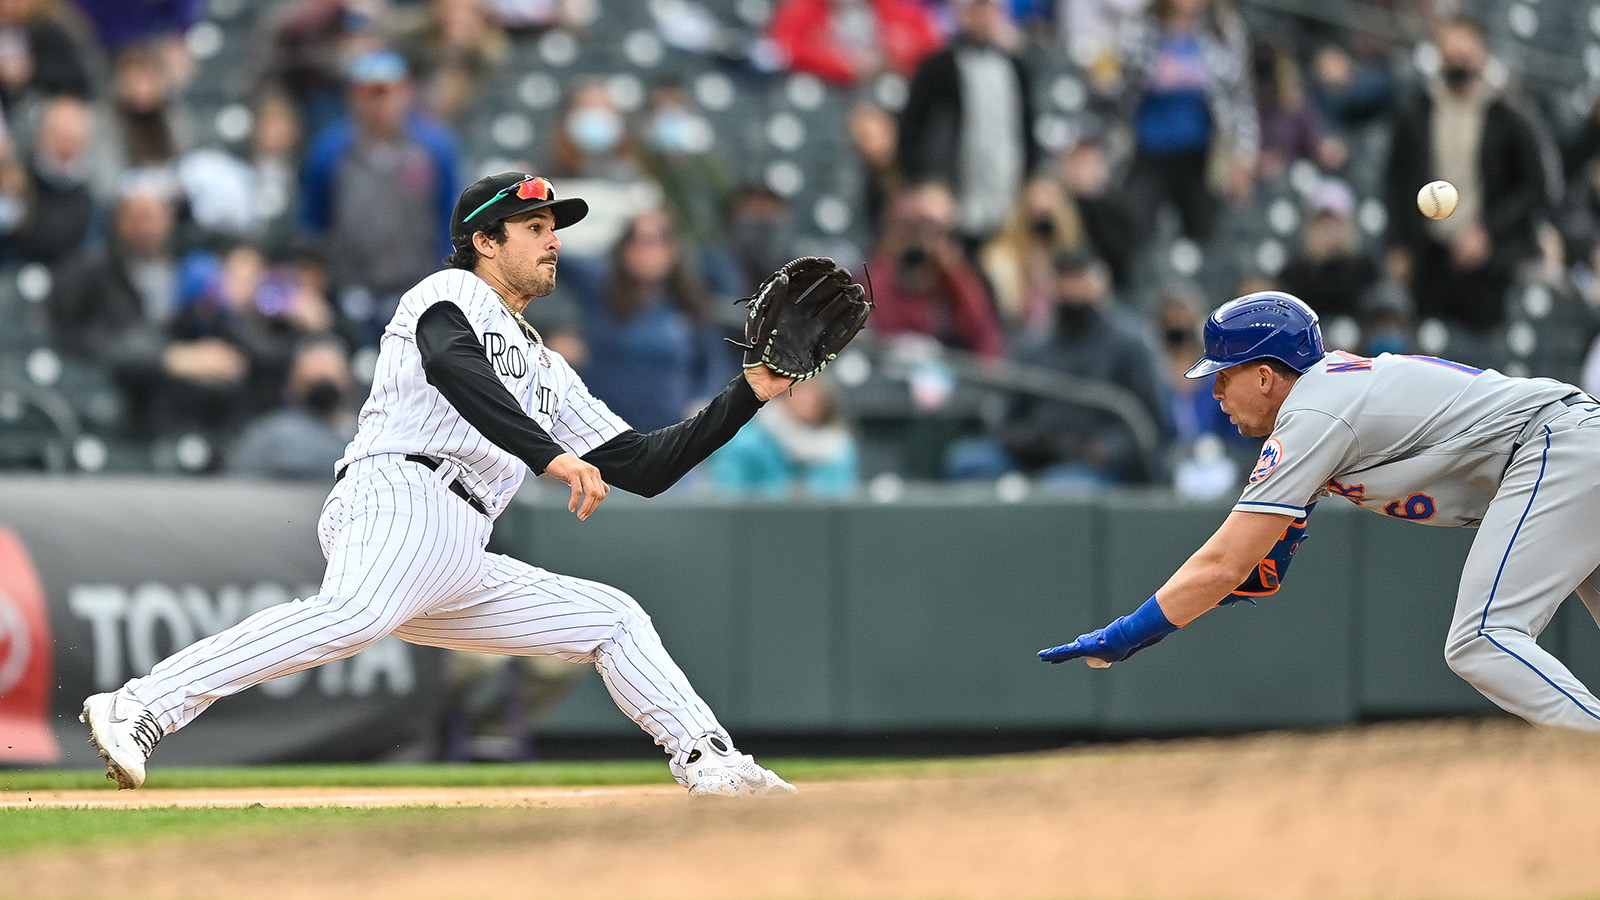 Colorado third baseman Josh Fuentes waits for the throw before tagging out Jeff McNeil attempting to stretch a double during a game between the Rockies and the Mets at Coors Field on April 18, 2021.